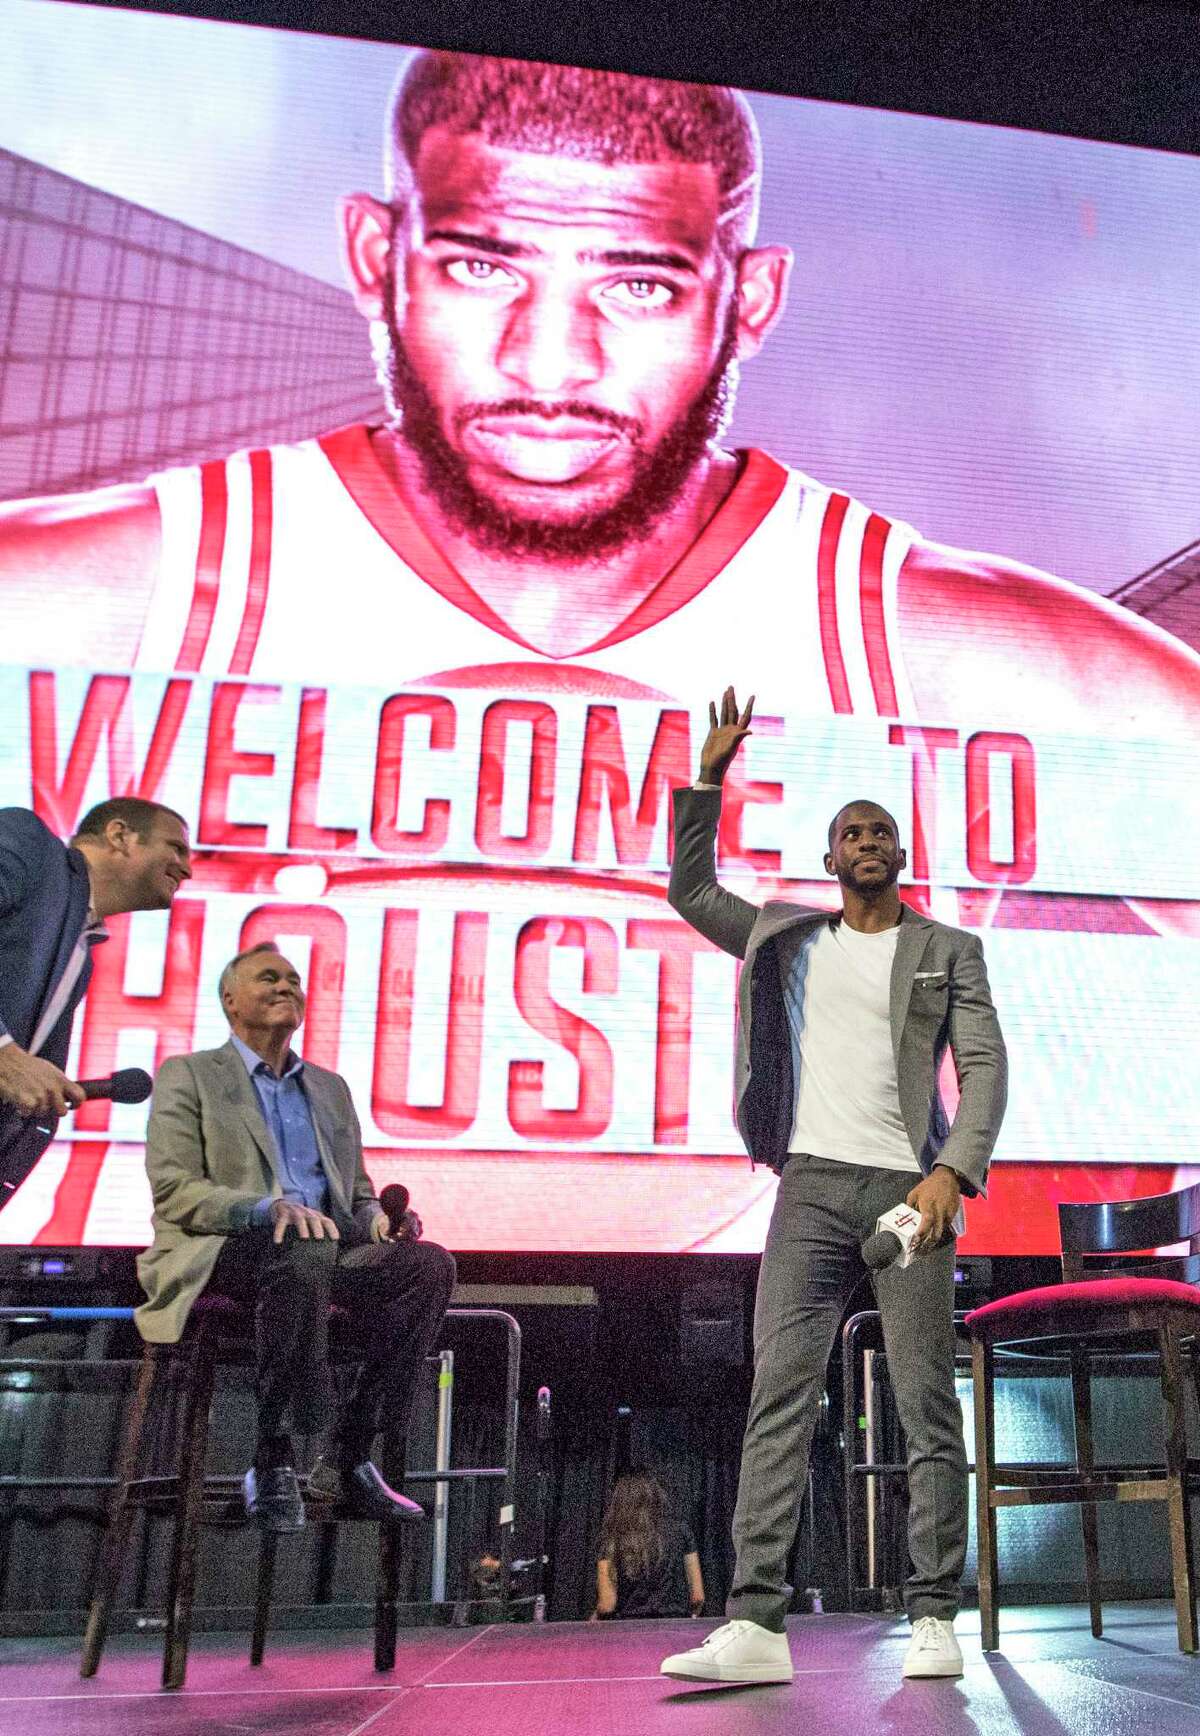 Chris Paul waves to fans after being introduced as the newest member of the Houston Rockets Friday, July 14, 2017, in Houston. The nine-time All-Star was traded from the Los Angeles Clippers late last month. (AP Photo/David J. Phillip)